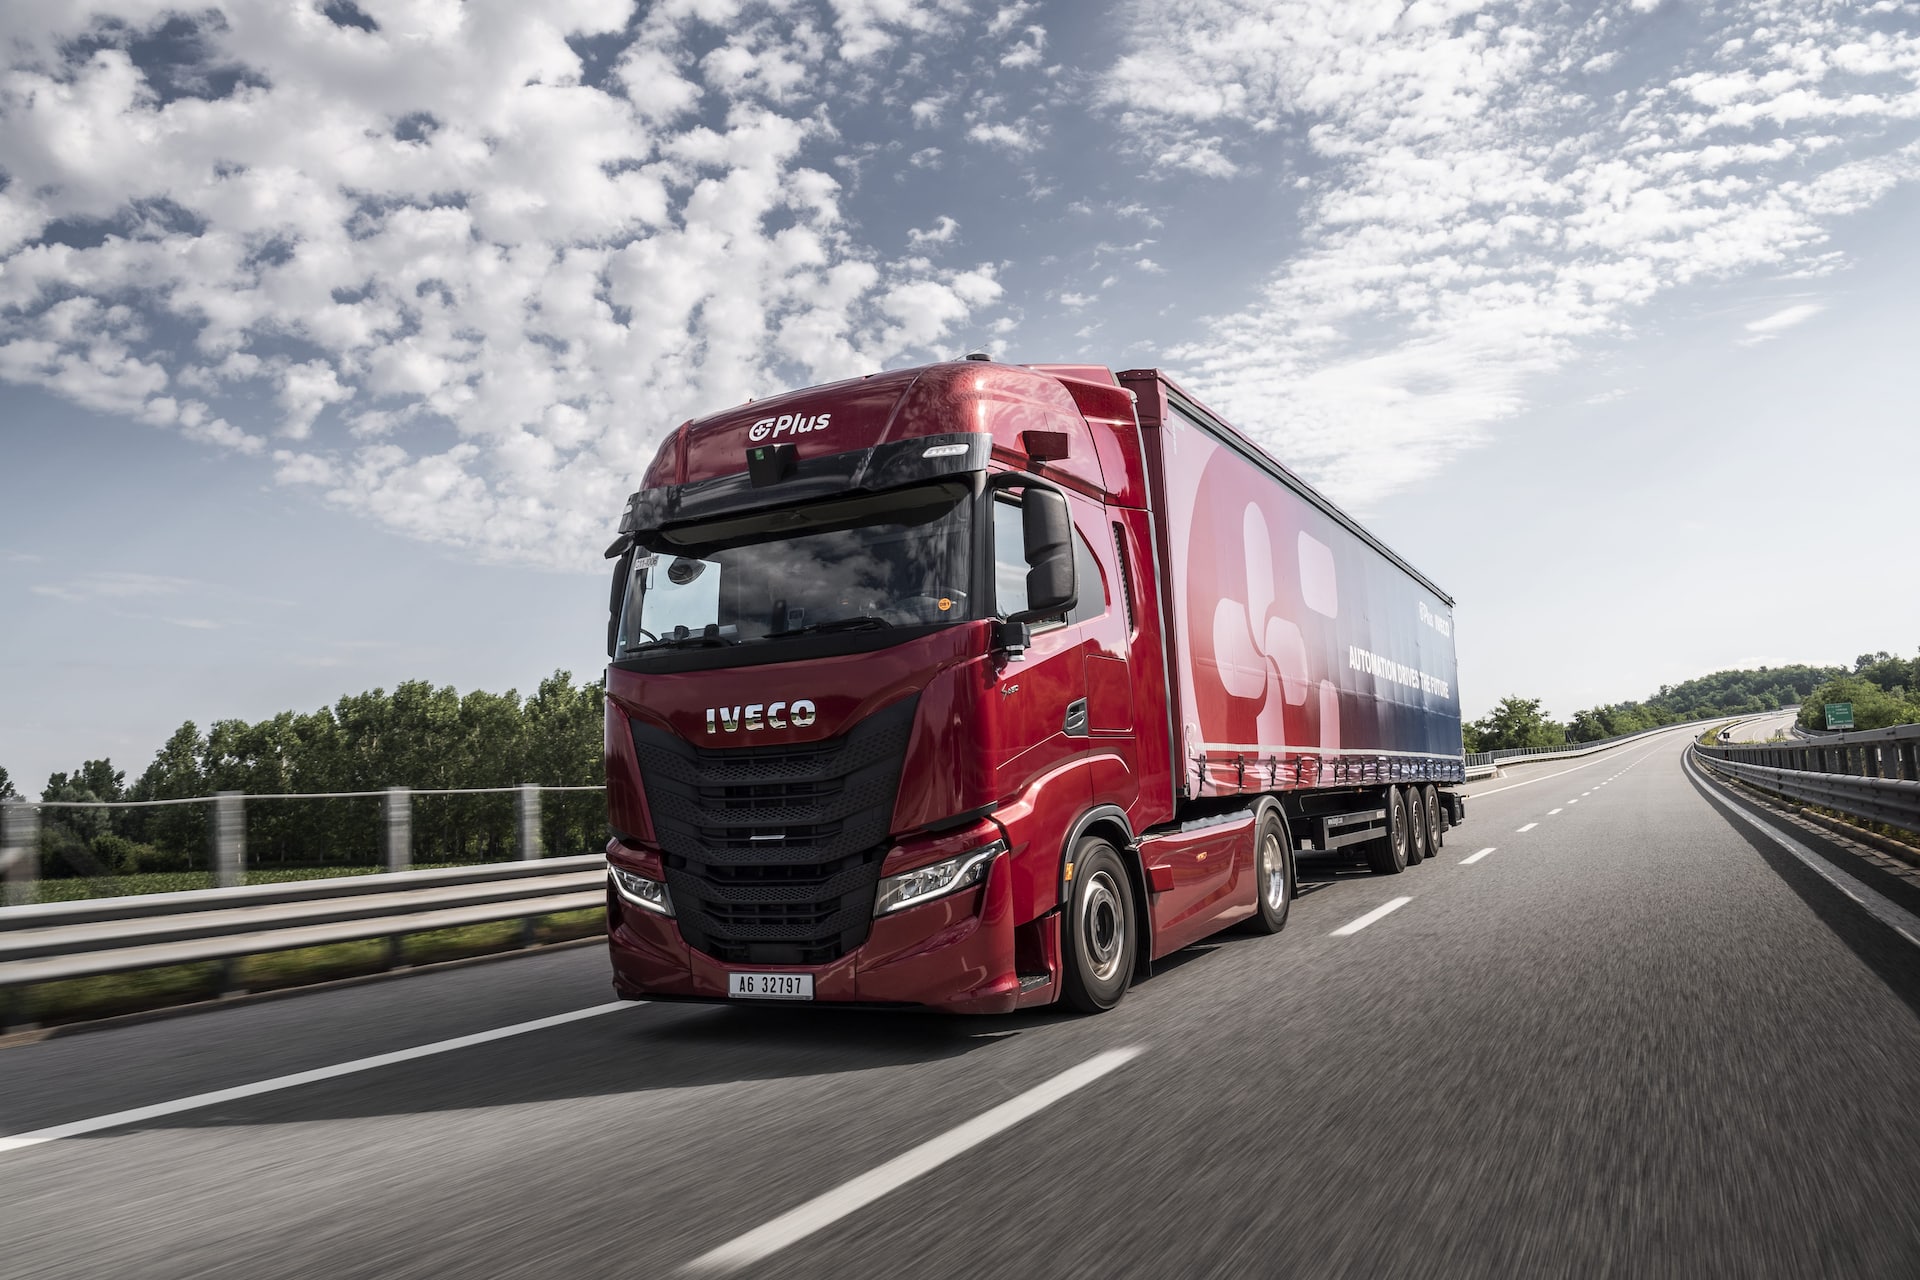 IVECO and Plus Launch Autonomous S-Way Truck in Germany